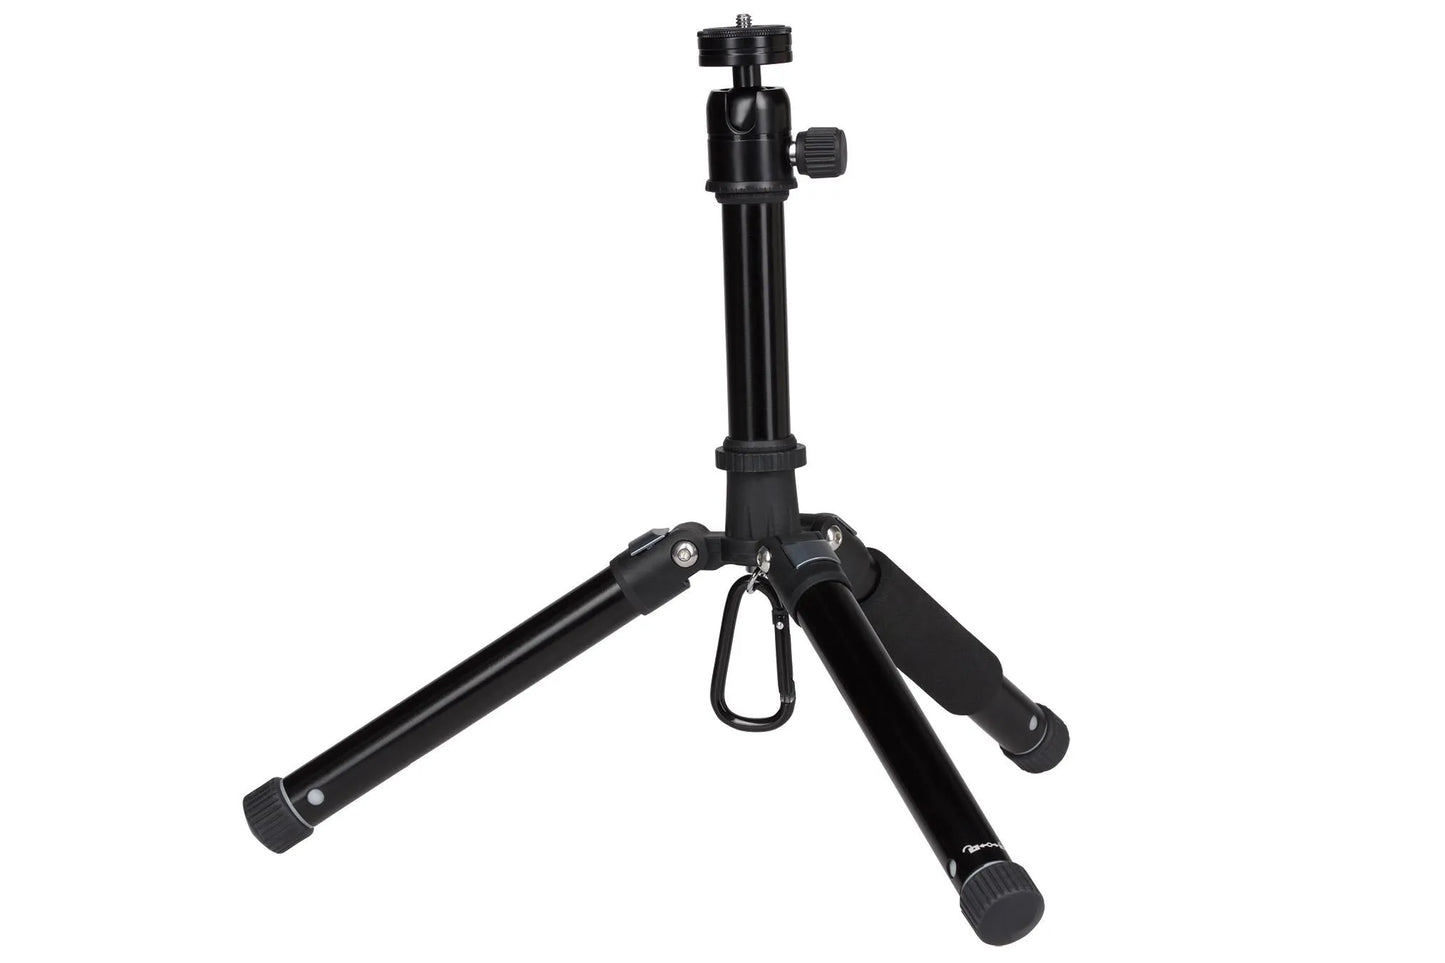 ProSound Portable Compact Tripod with Ball Head and Fully Adjustable Legs - ProSound